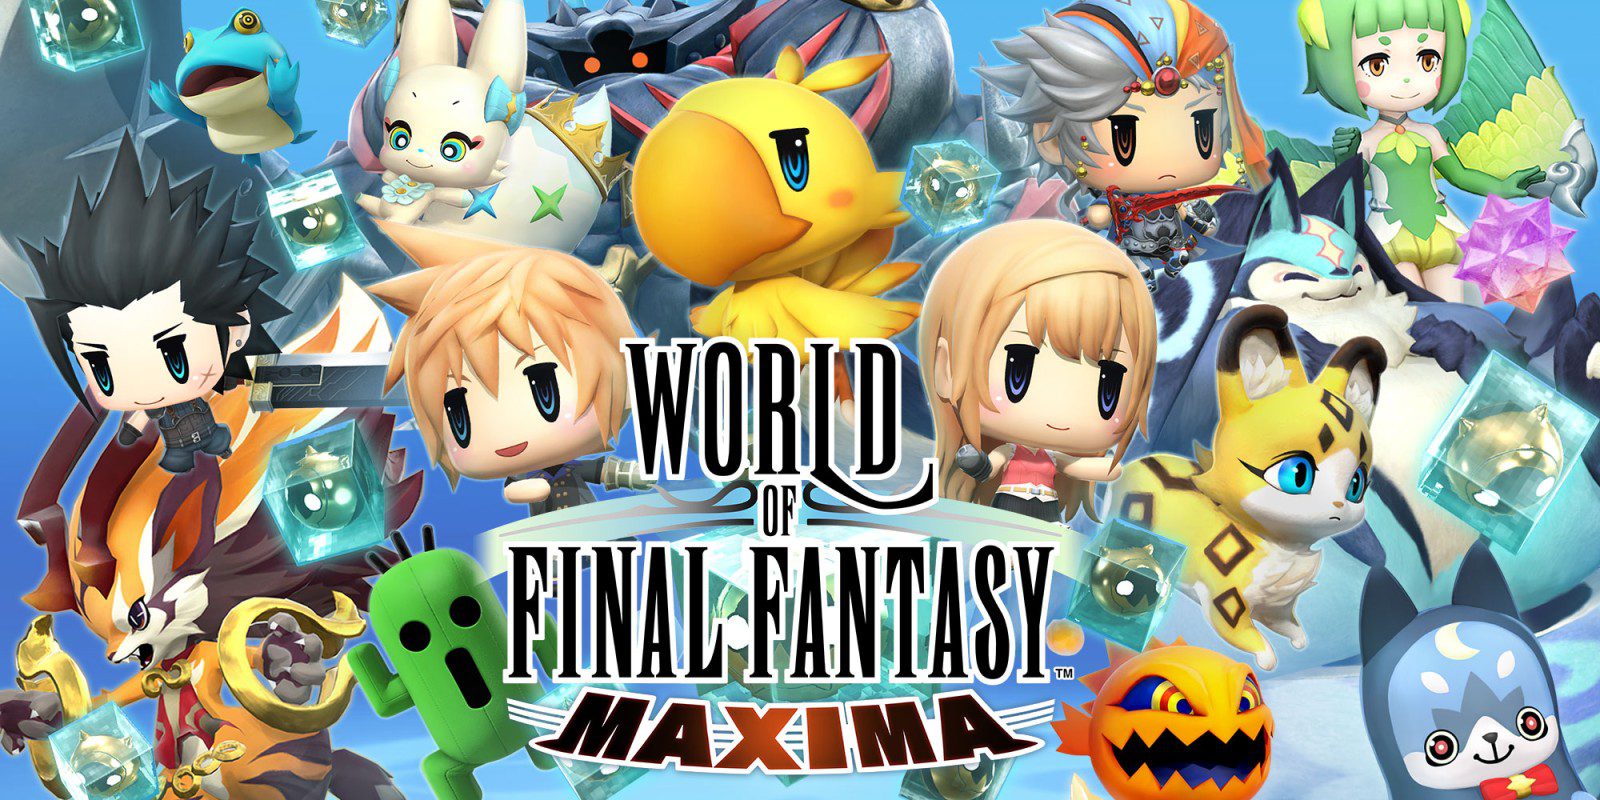 Final Fantasy Maxima arrives on consoles today